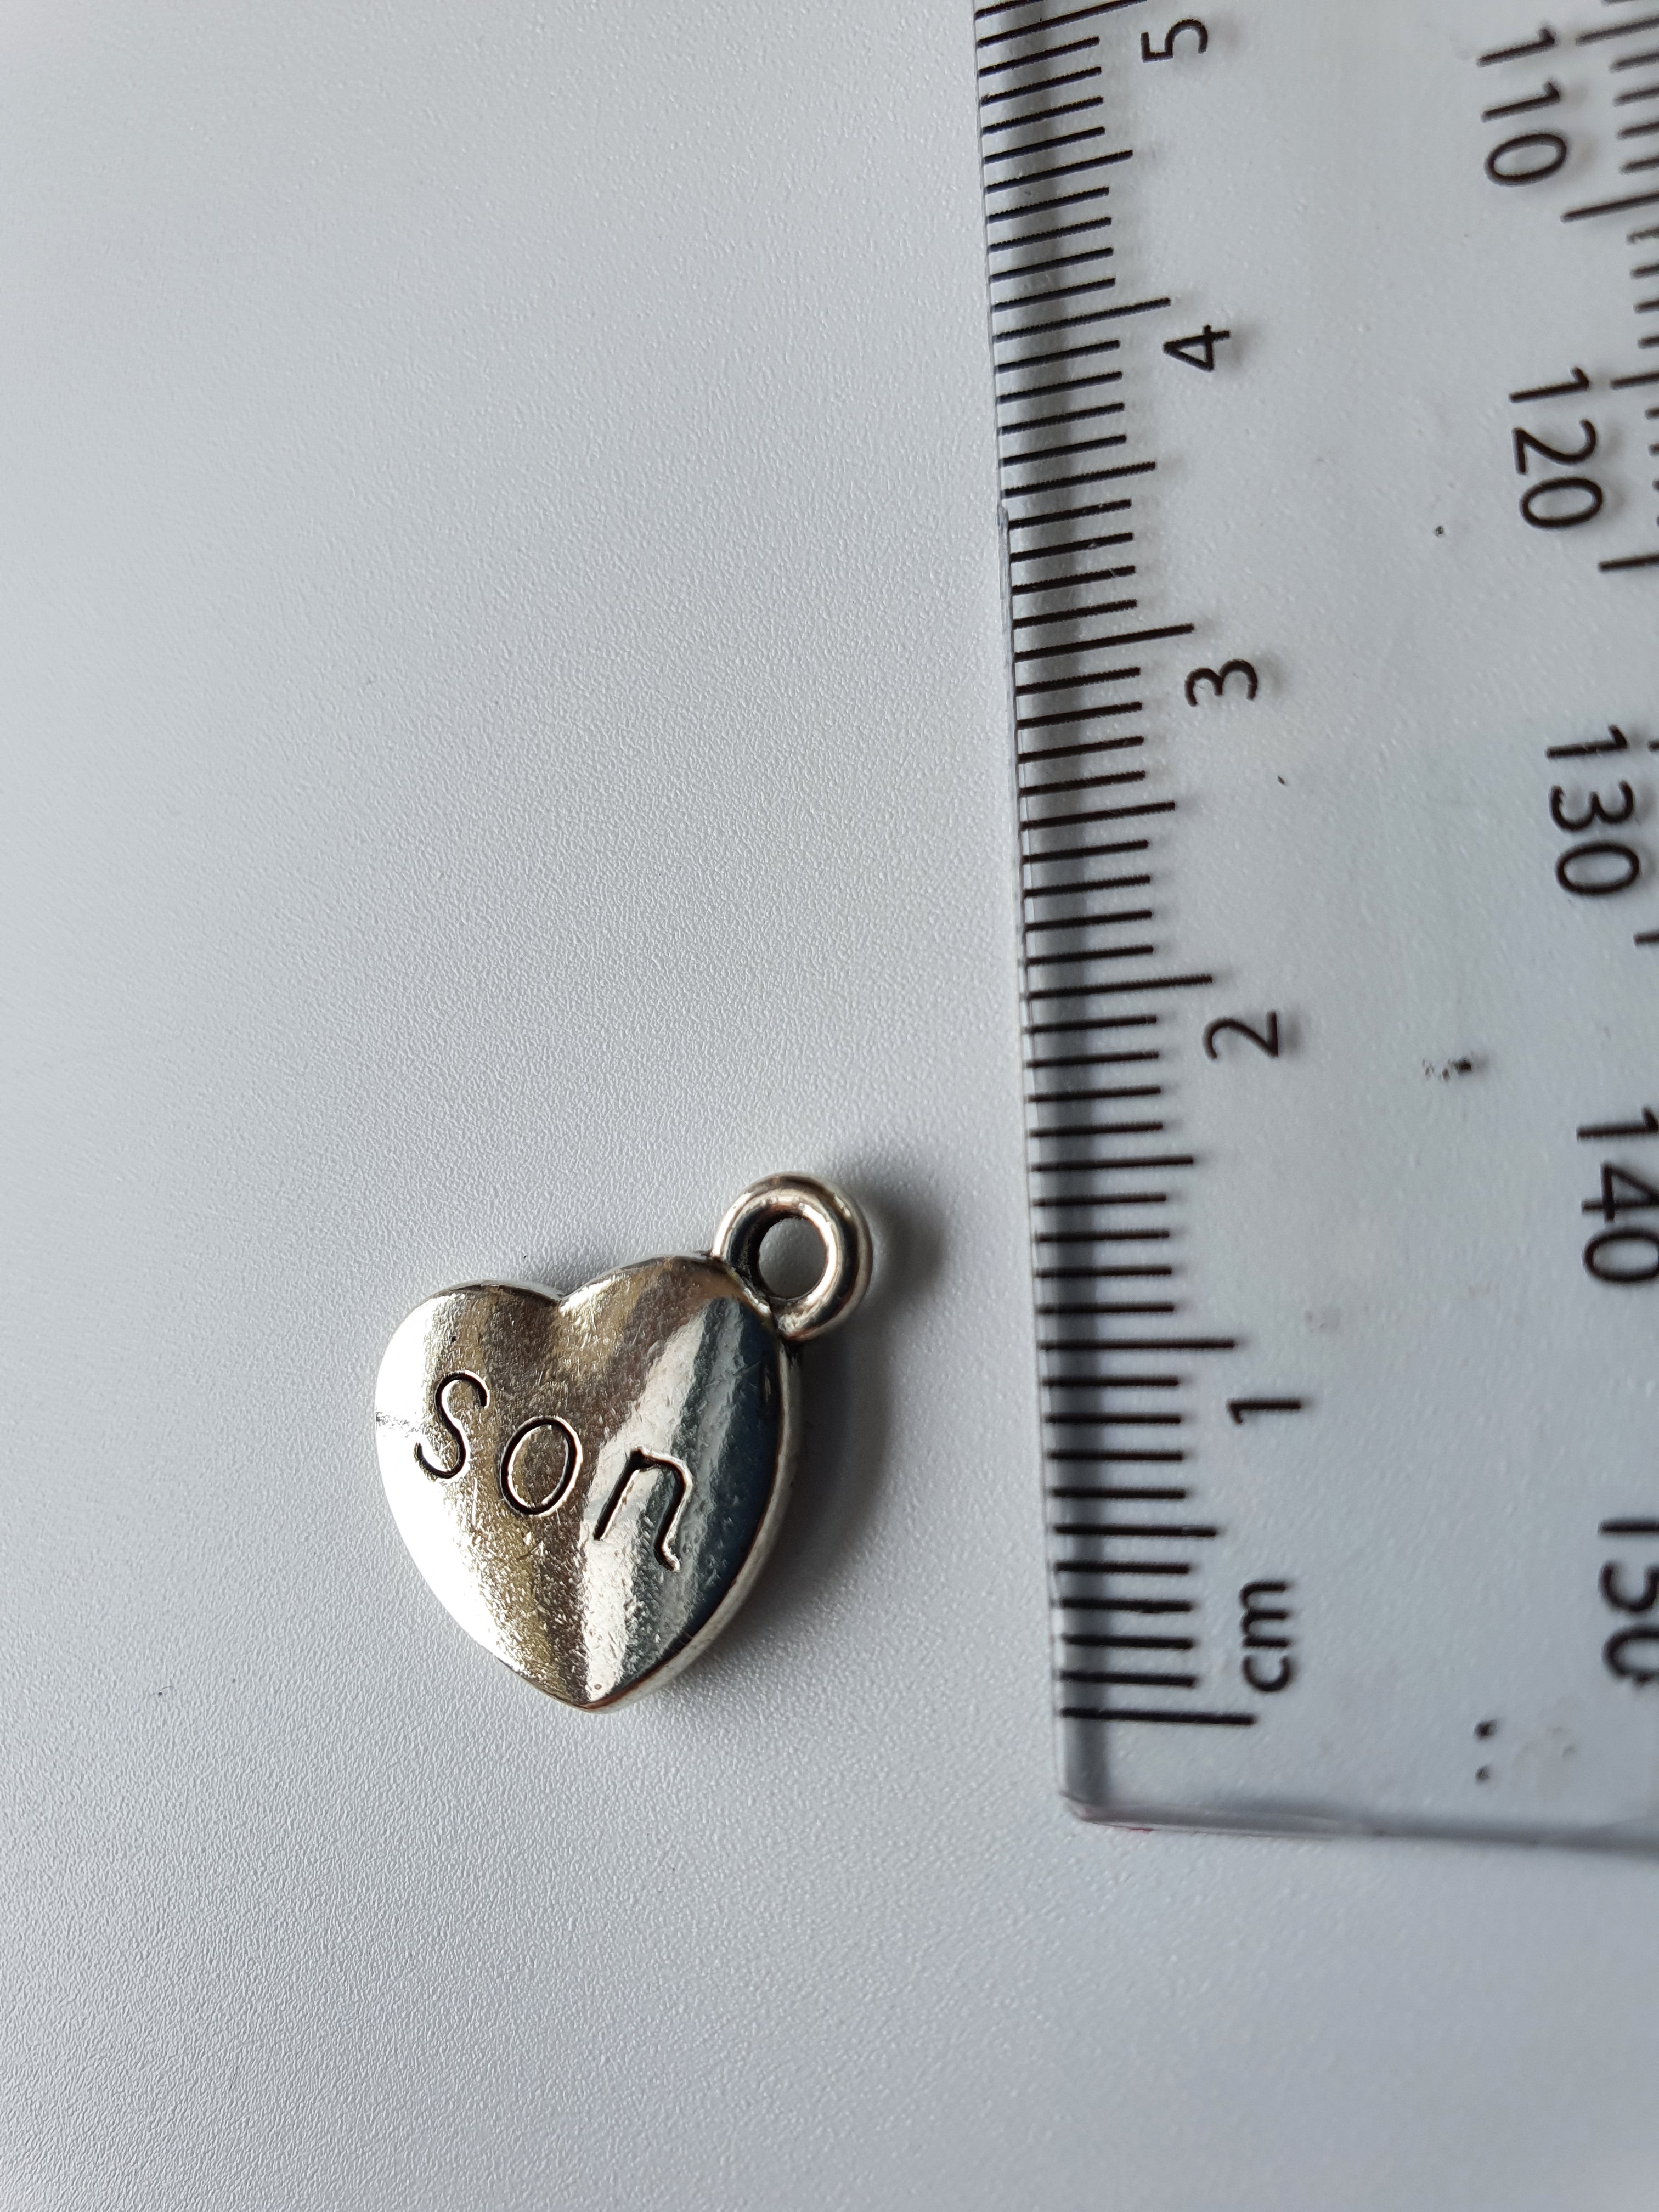 Silver charm with 'son' engraved on it